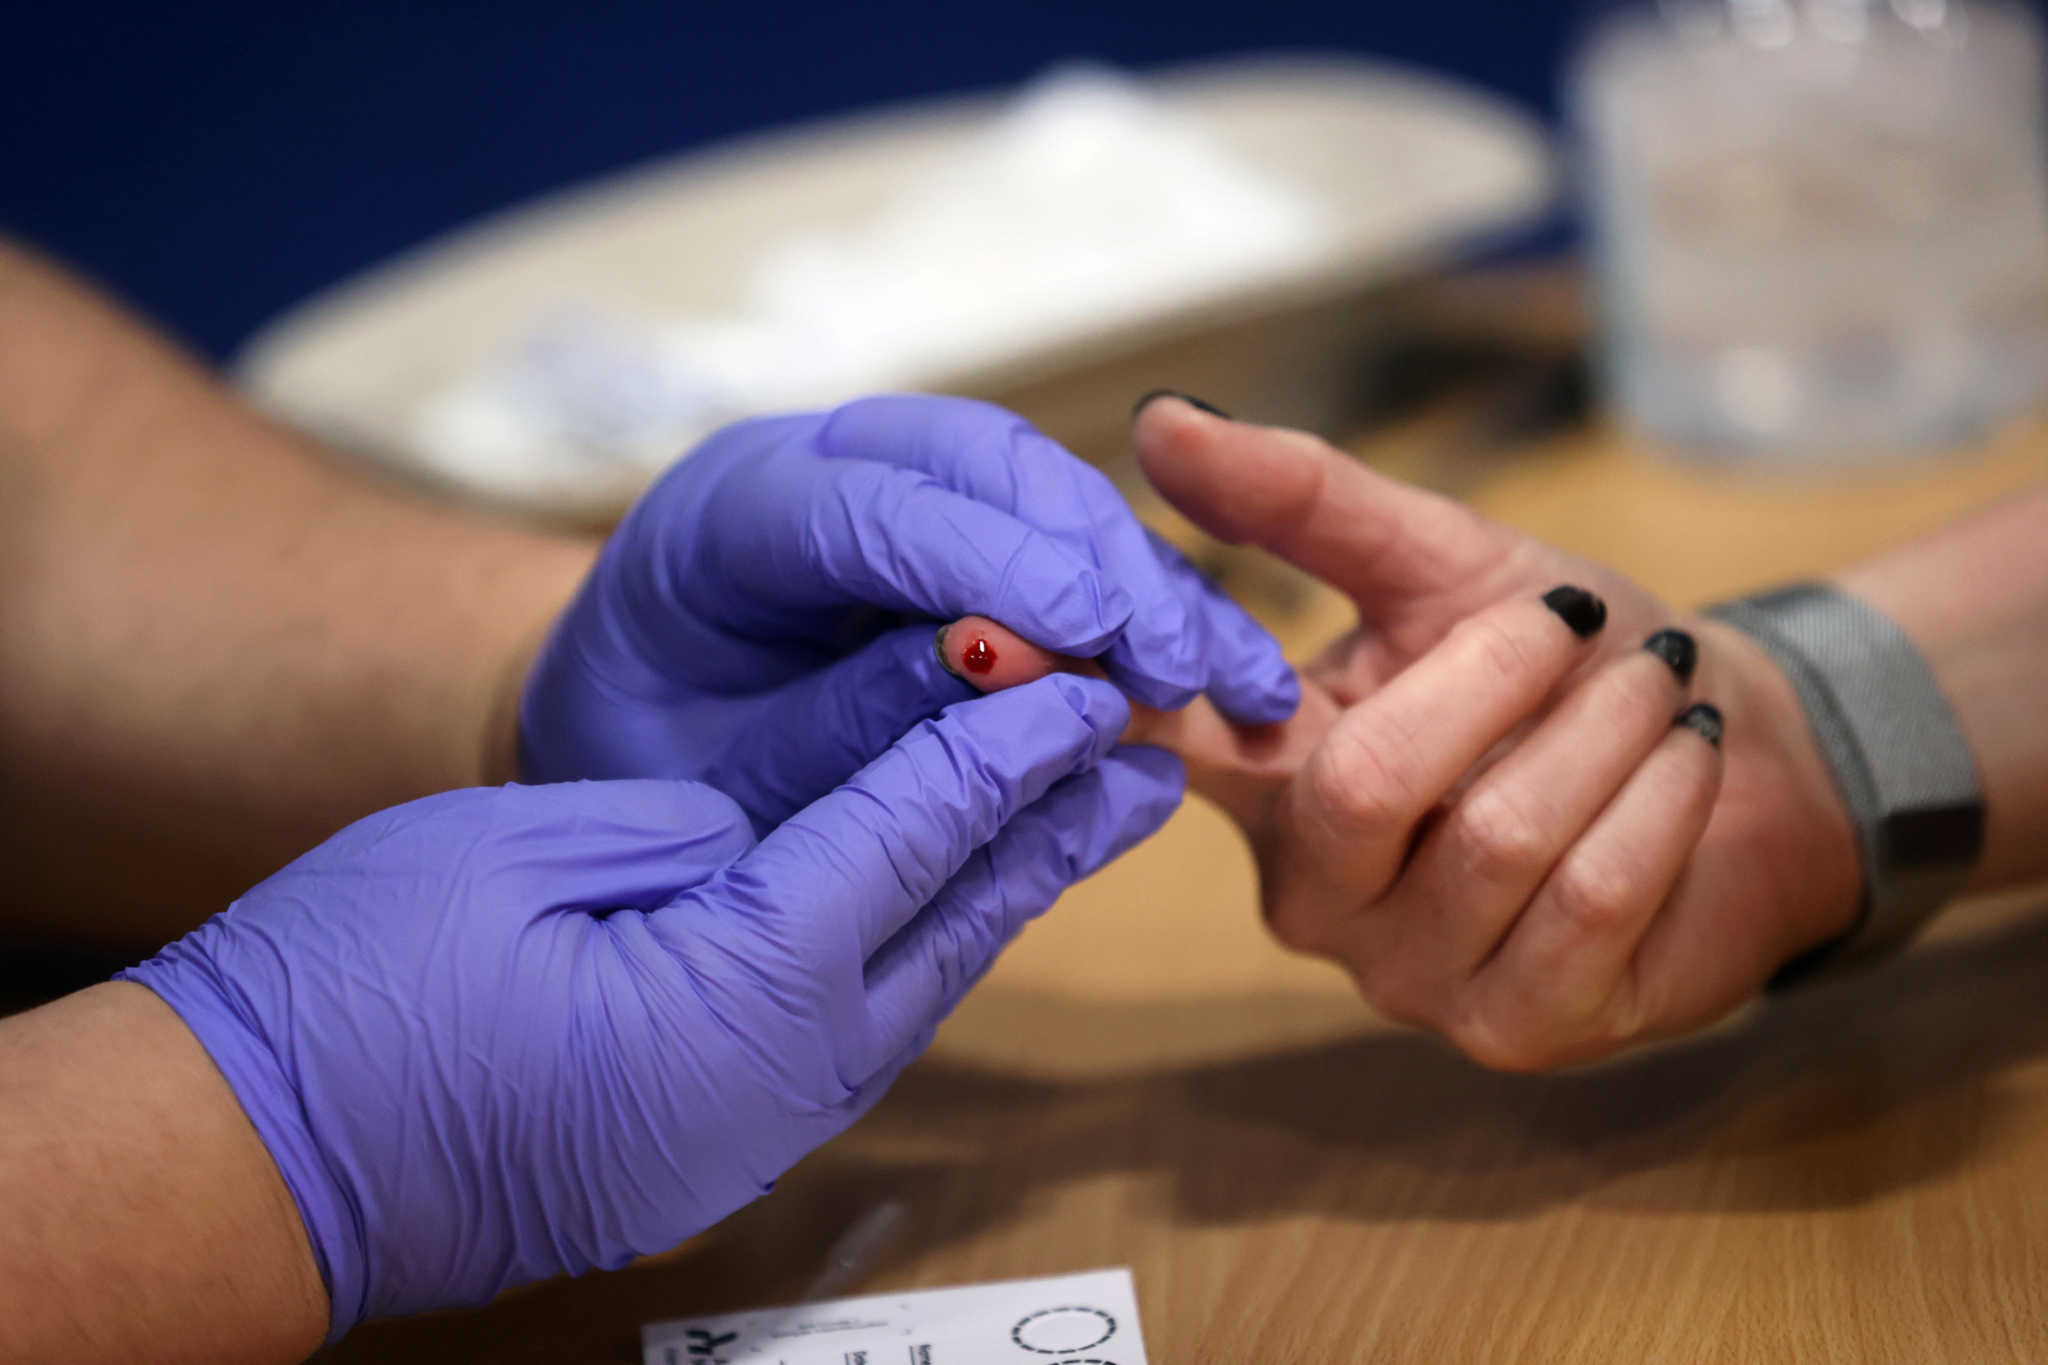 A worker takes a blood sample from a woman during a clinical trial of tests for the coronavirus disease (COVID-19) antibodies, at Keele University, in Keele, Britain June 30, 2020. REUTERS/Carl Recine